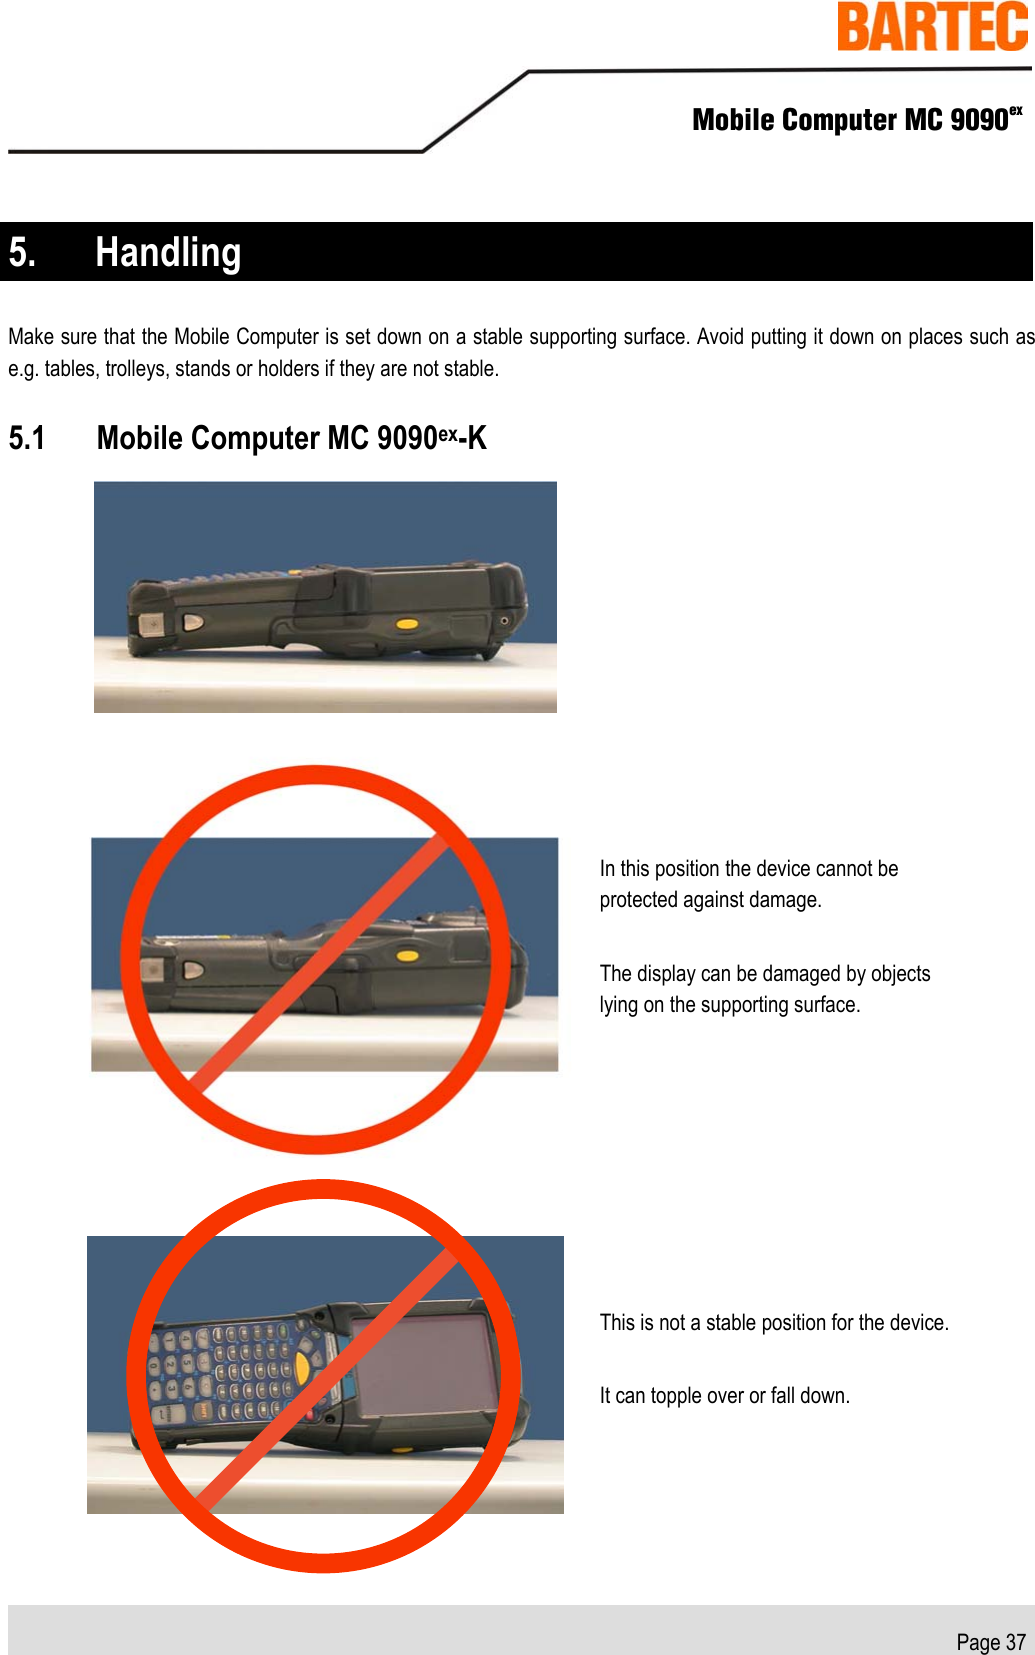    Mobile Computer MC 9090ex   Page 37  5. Handling Make sure that the Mobile Computer is set down on a stable supporting surface. Avoid putting it down on places such as e.g. tables, trolleys, stands or holders if they are not stable.  5.1 Mobile Computer MC 9090ex-K    In this position the device cannot be protected against damage. The display can be damaged by objects lying on the supporting surface.  This is not a stable position for the device. It can topple over or fall down. 